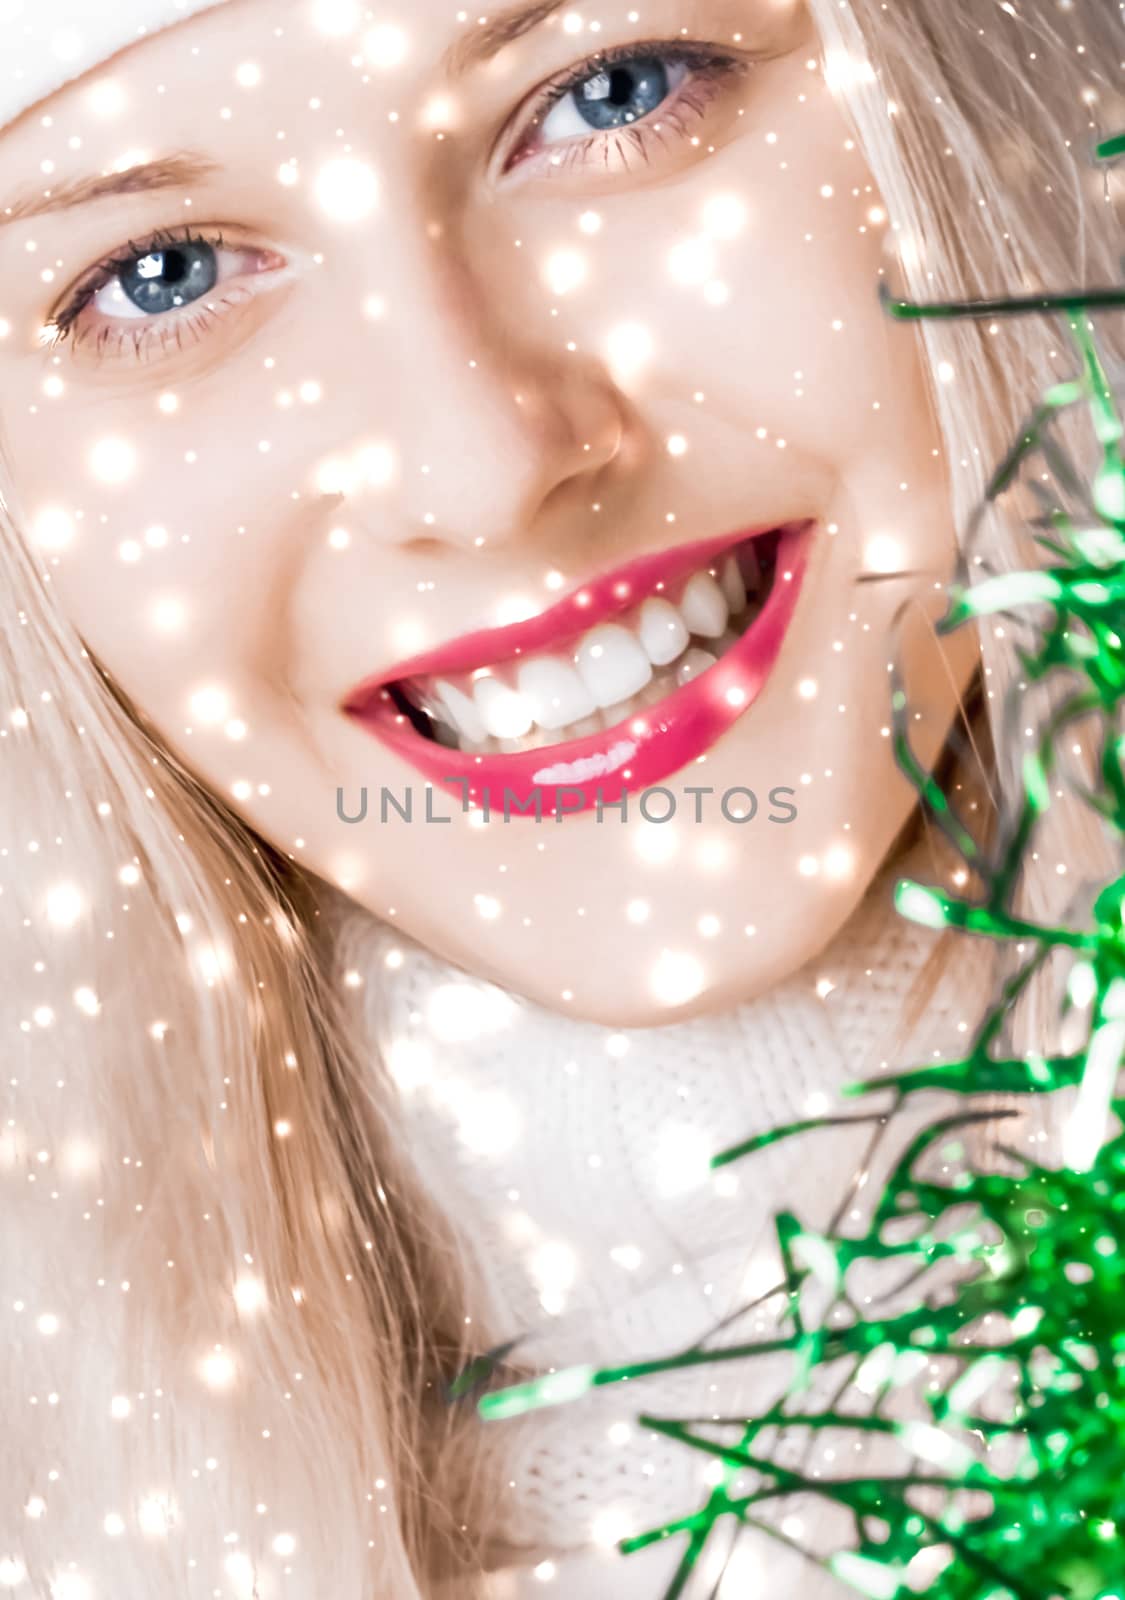 Merry Christmas and glitter snow background, blonde woman with positive emotion in winter season for shopping sale and holiday brands